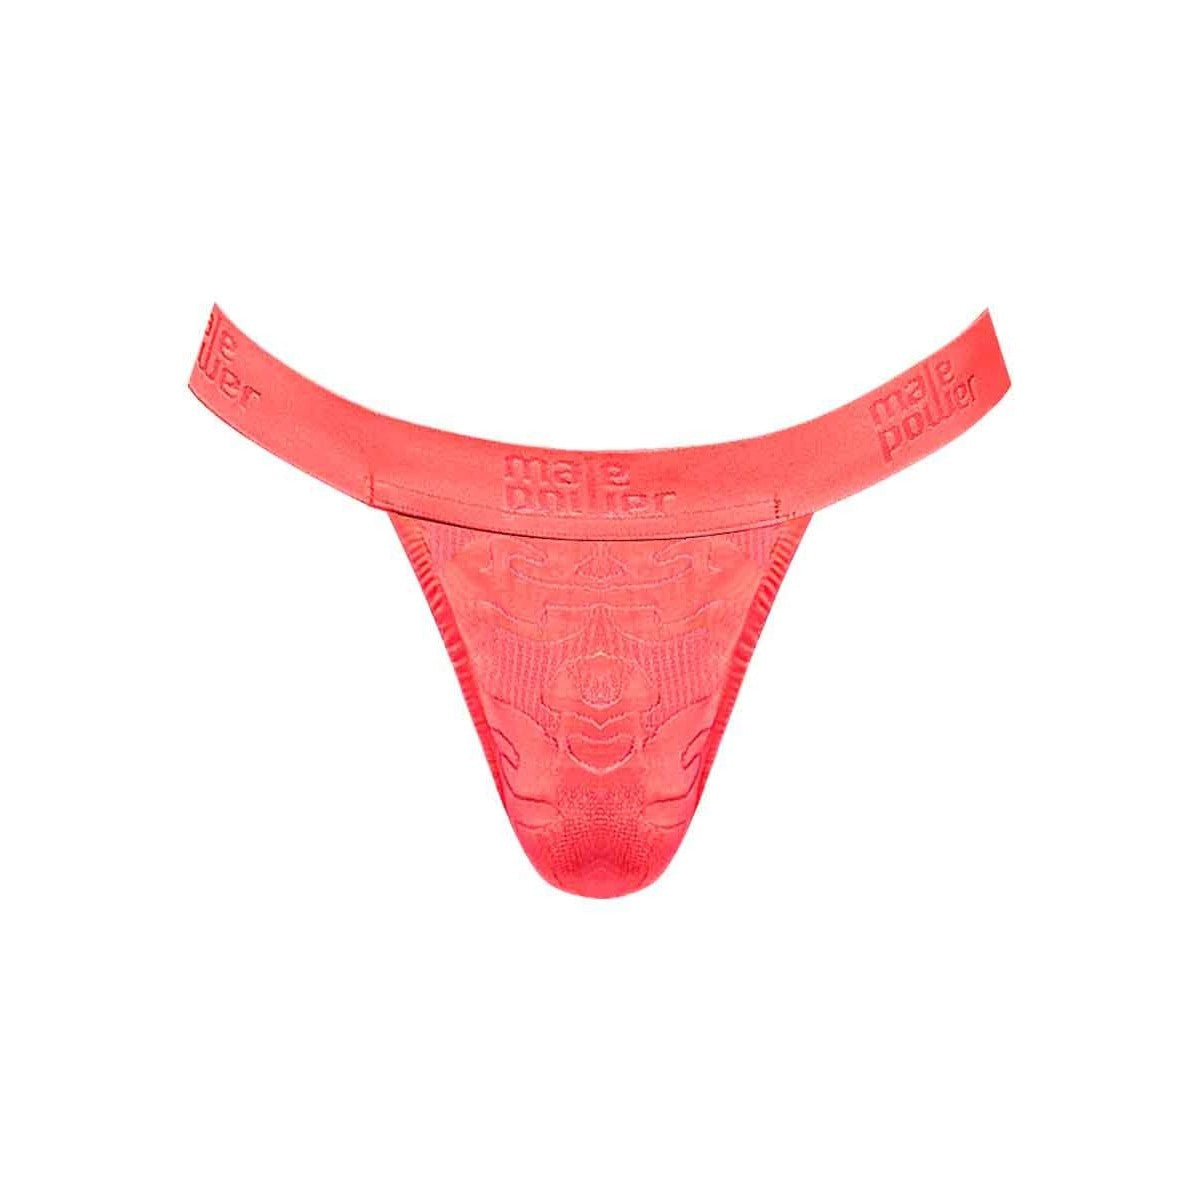 Impressions Micro G-string Coral L-xl Intimates Adult Boutique